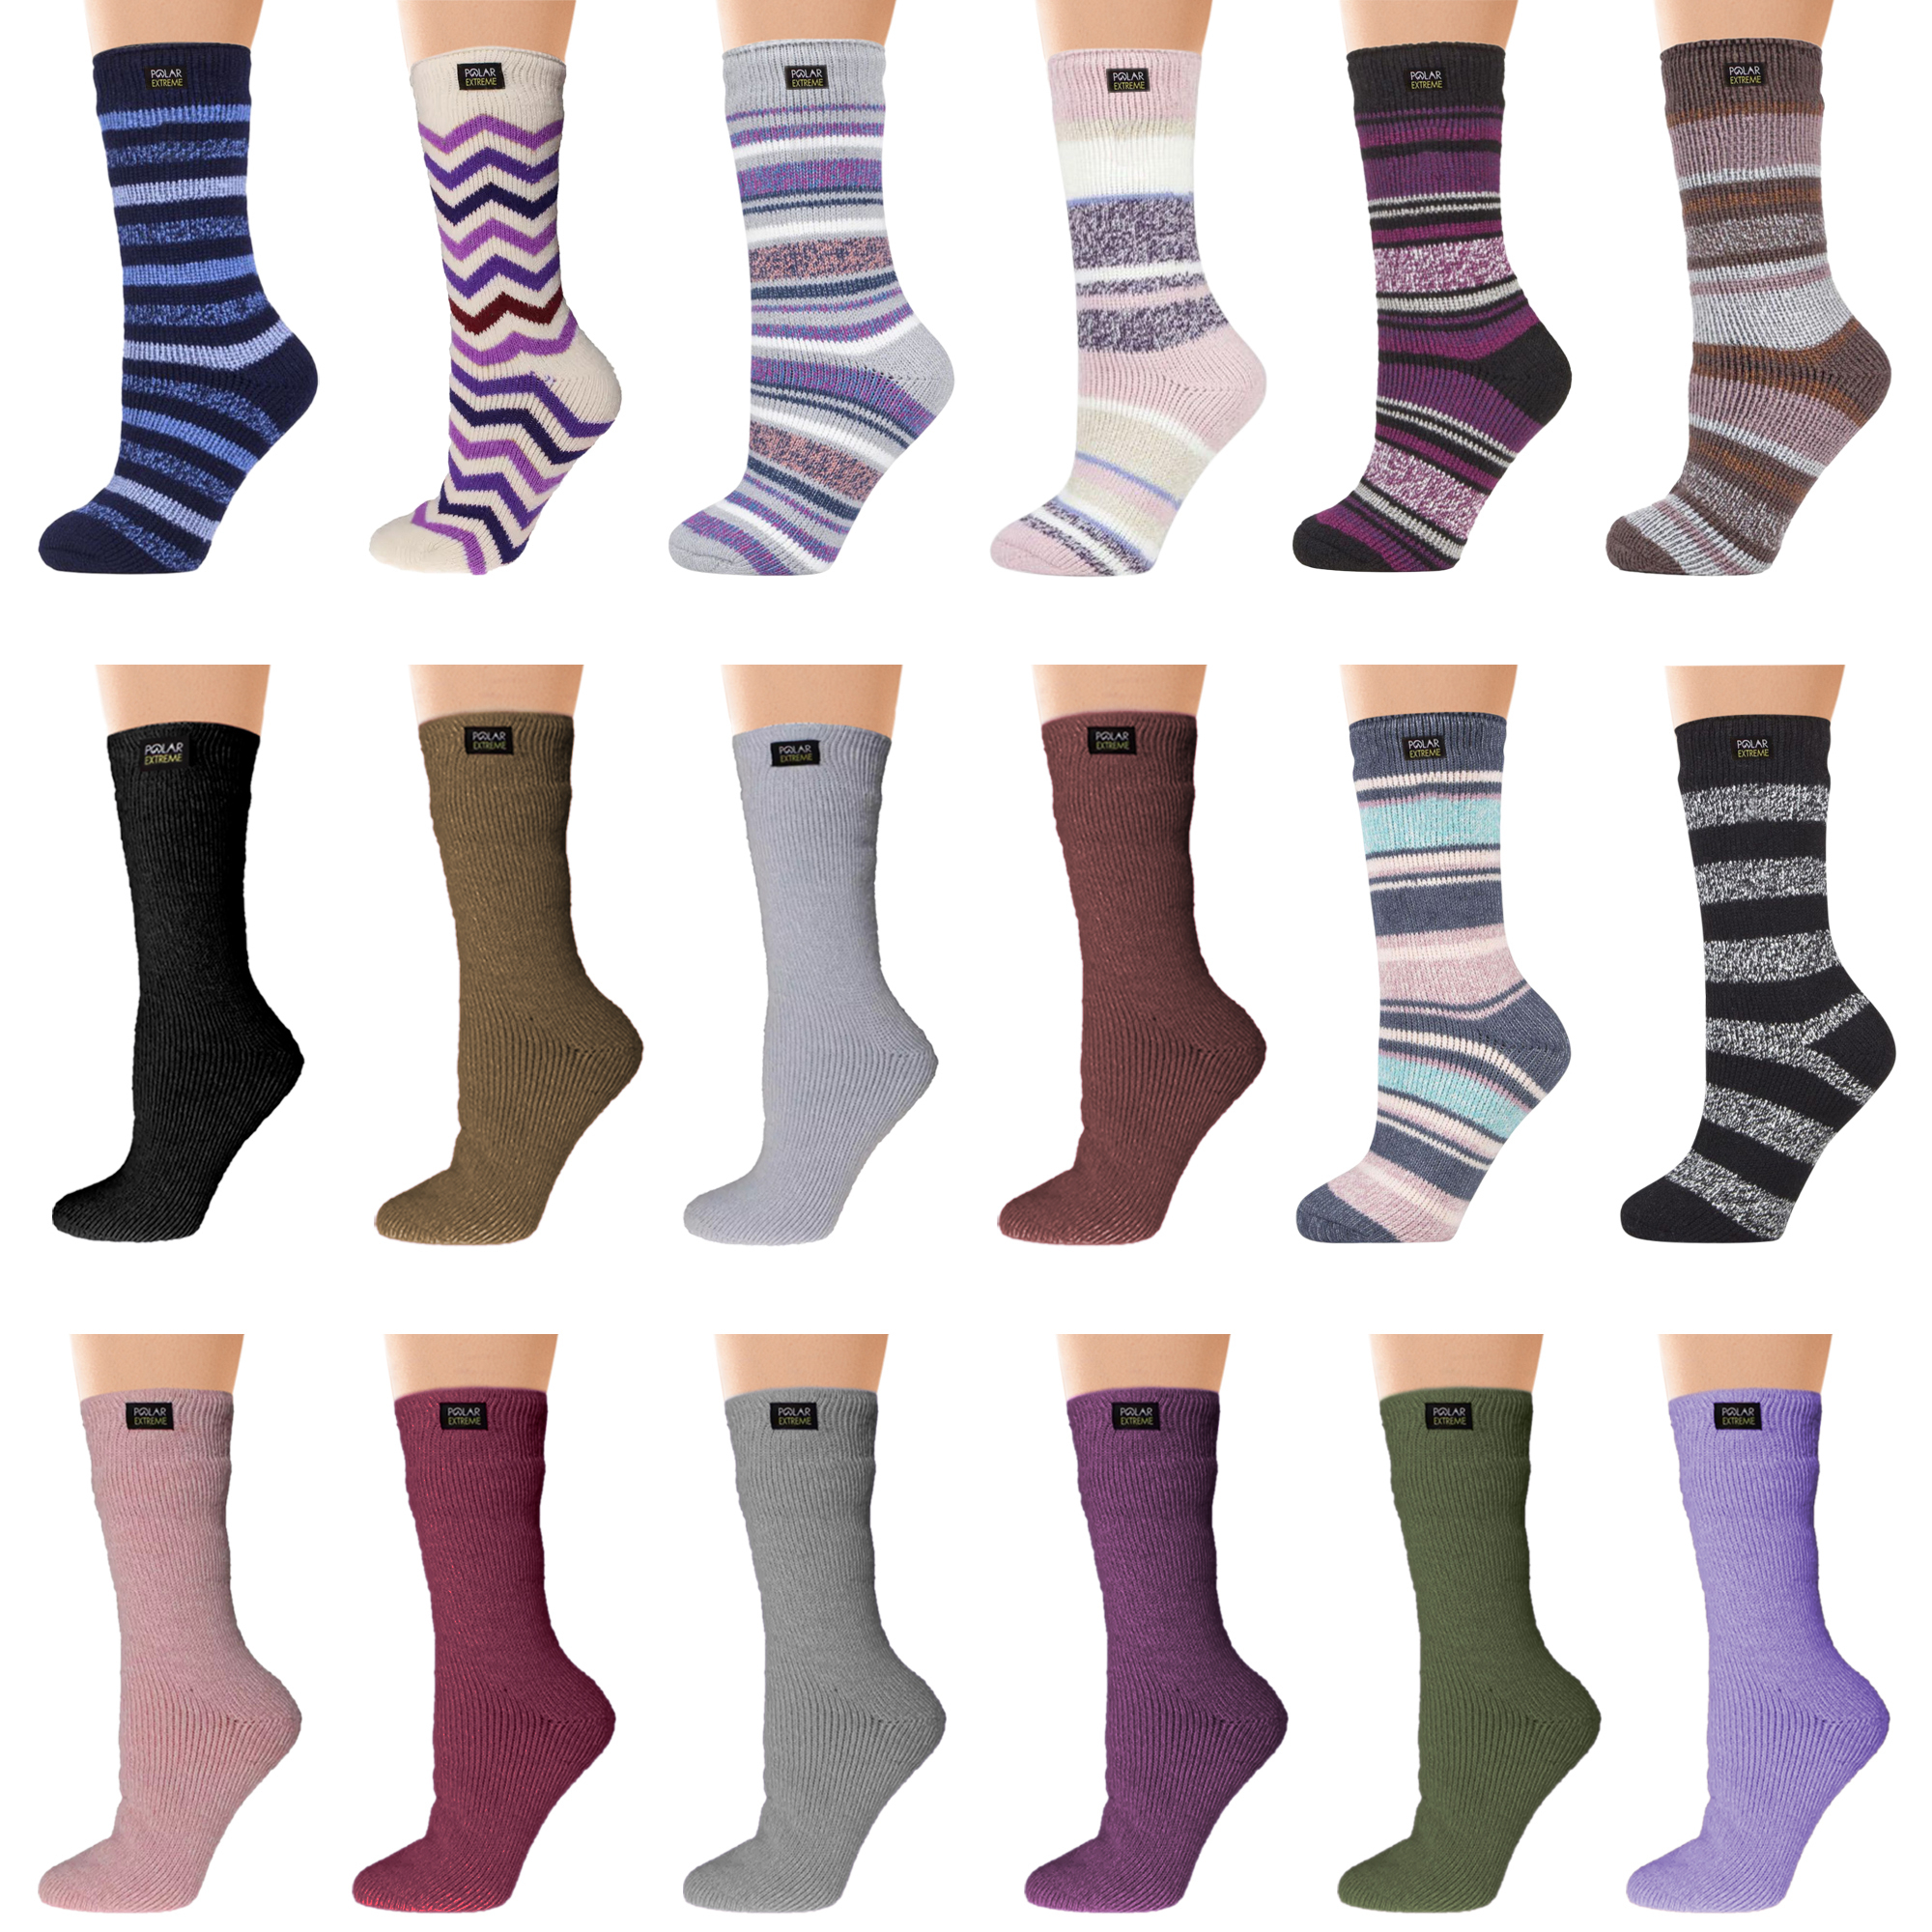 4-Pairs: Women's Polar Extreme Thermal Insulated Soft Winter Warm Crew Socks